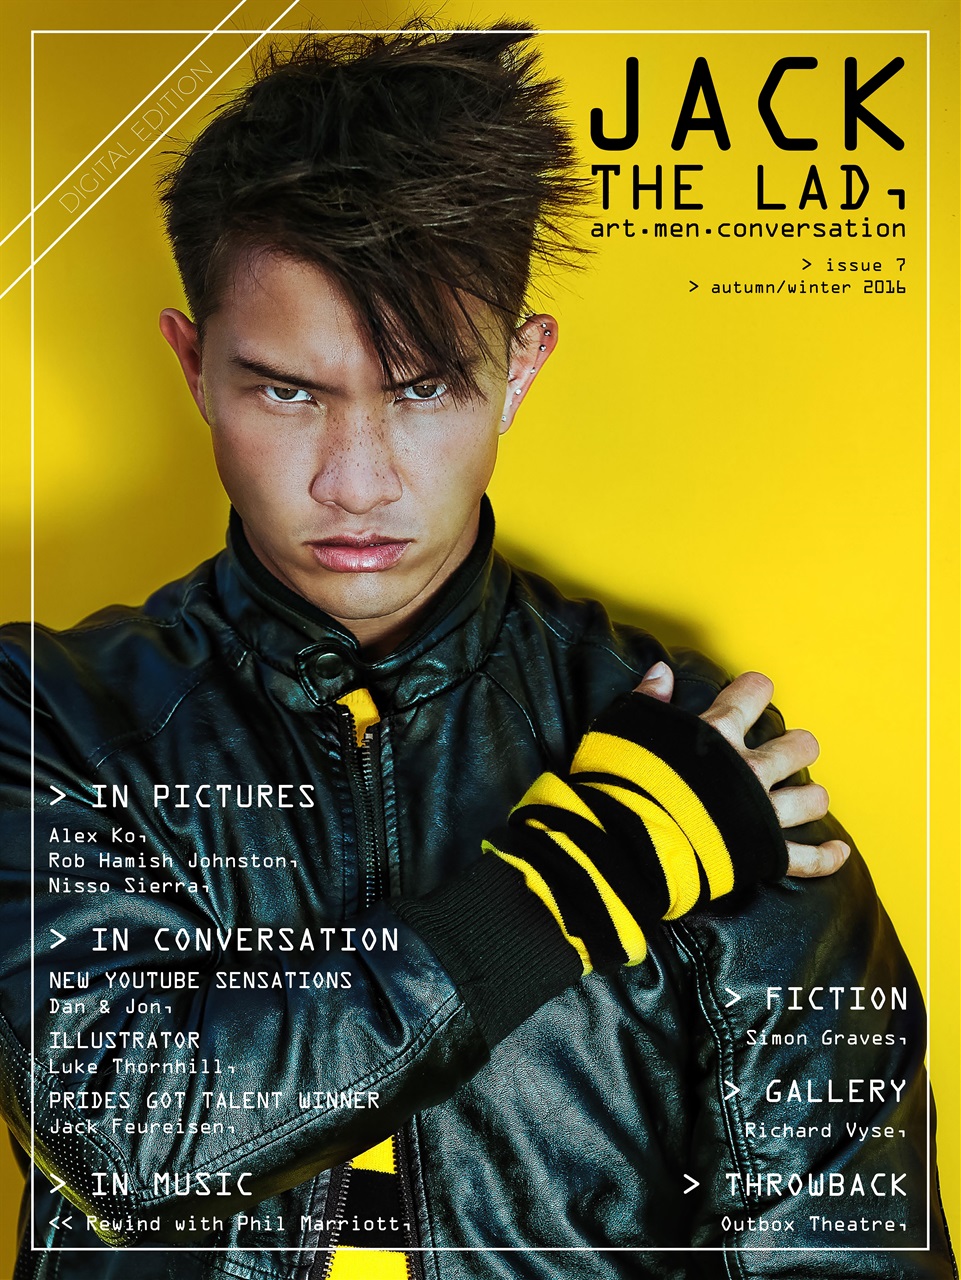 Jack The Lad Magazine Issue 7 Autumn/Winter 2016 Subscriptions.